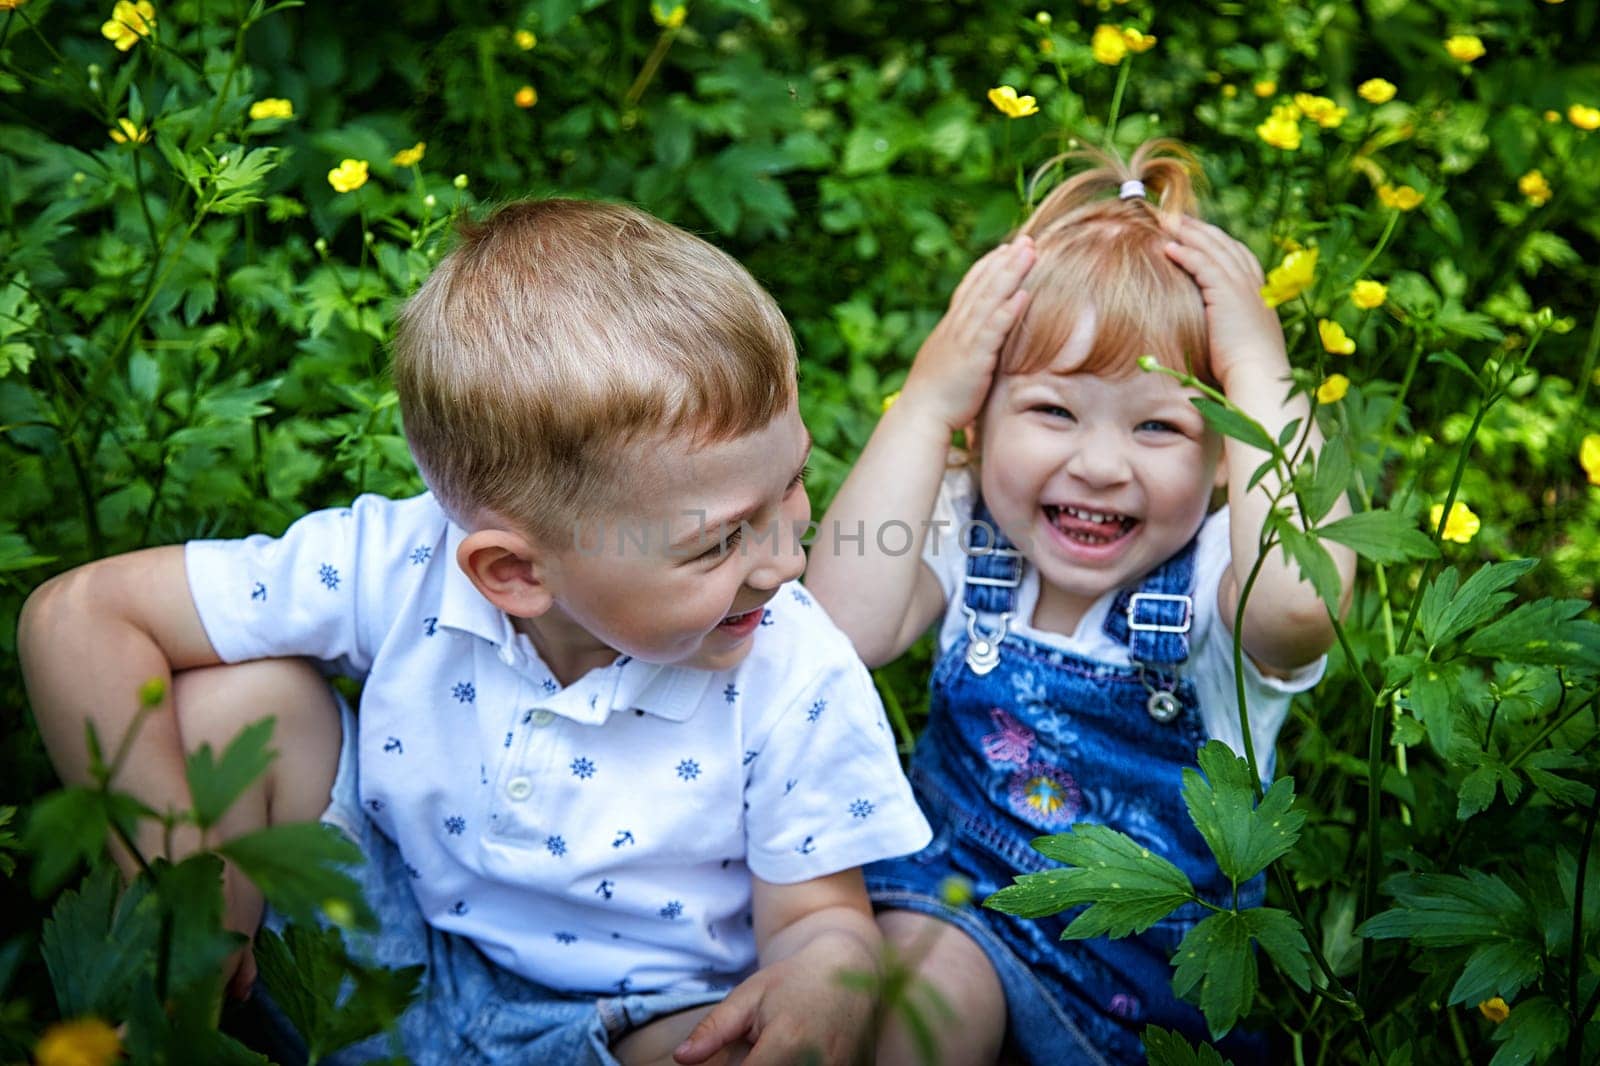 Cute kids in flowers in nature. Funny Boy and girl in the grass. A good environment means Healthy, happy children by keleny